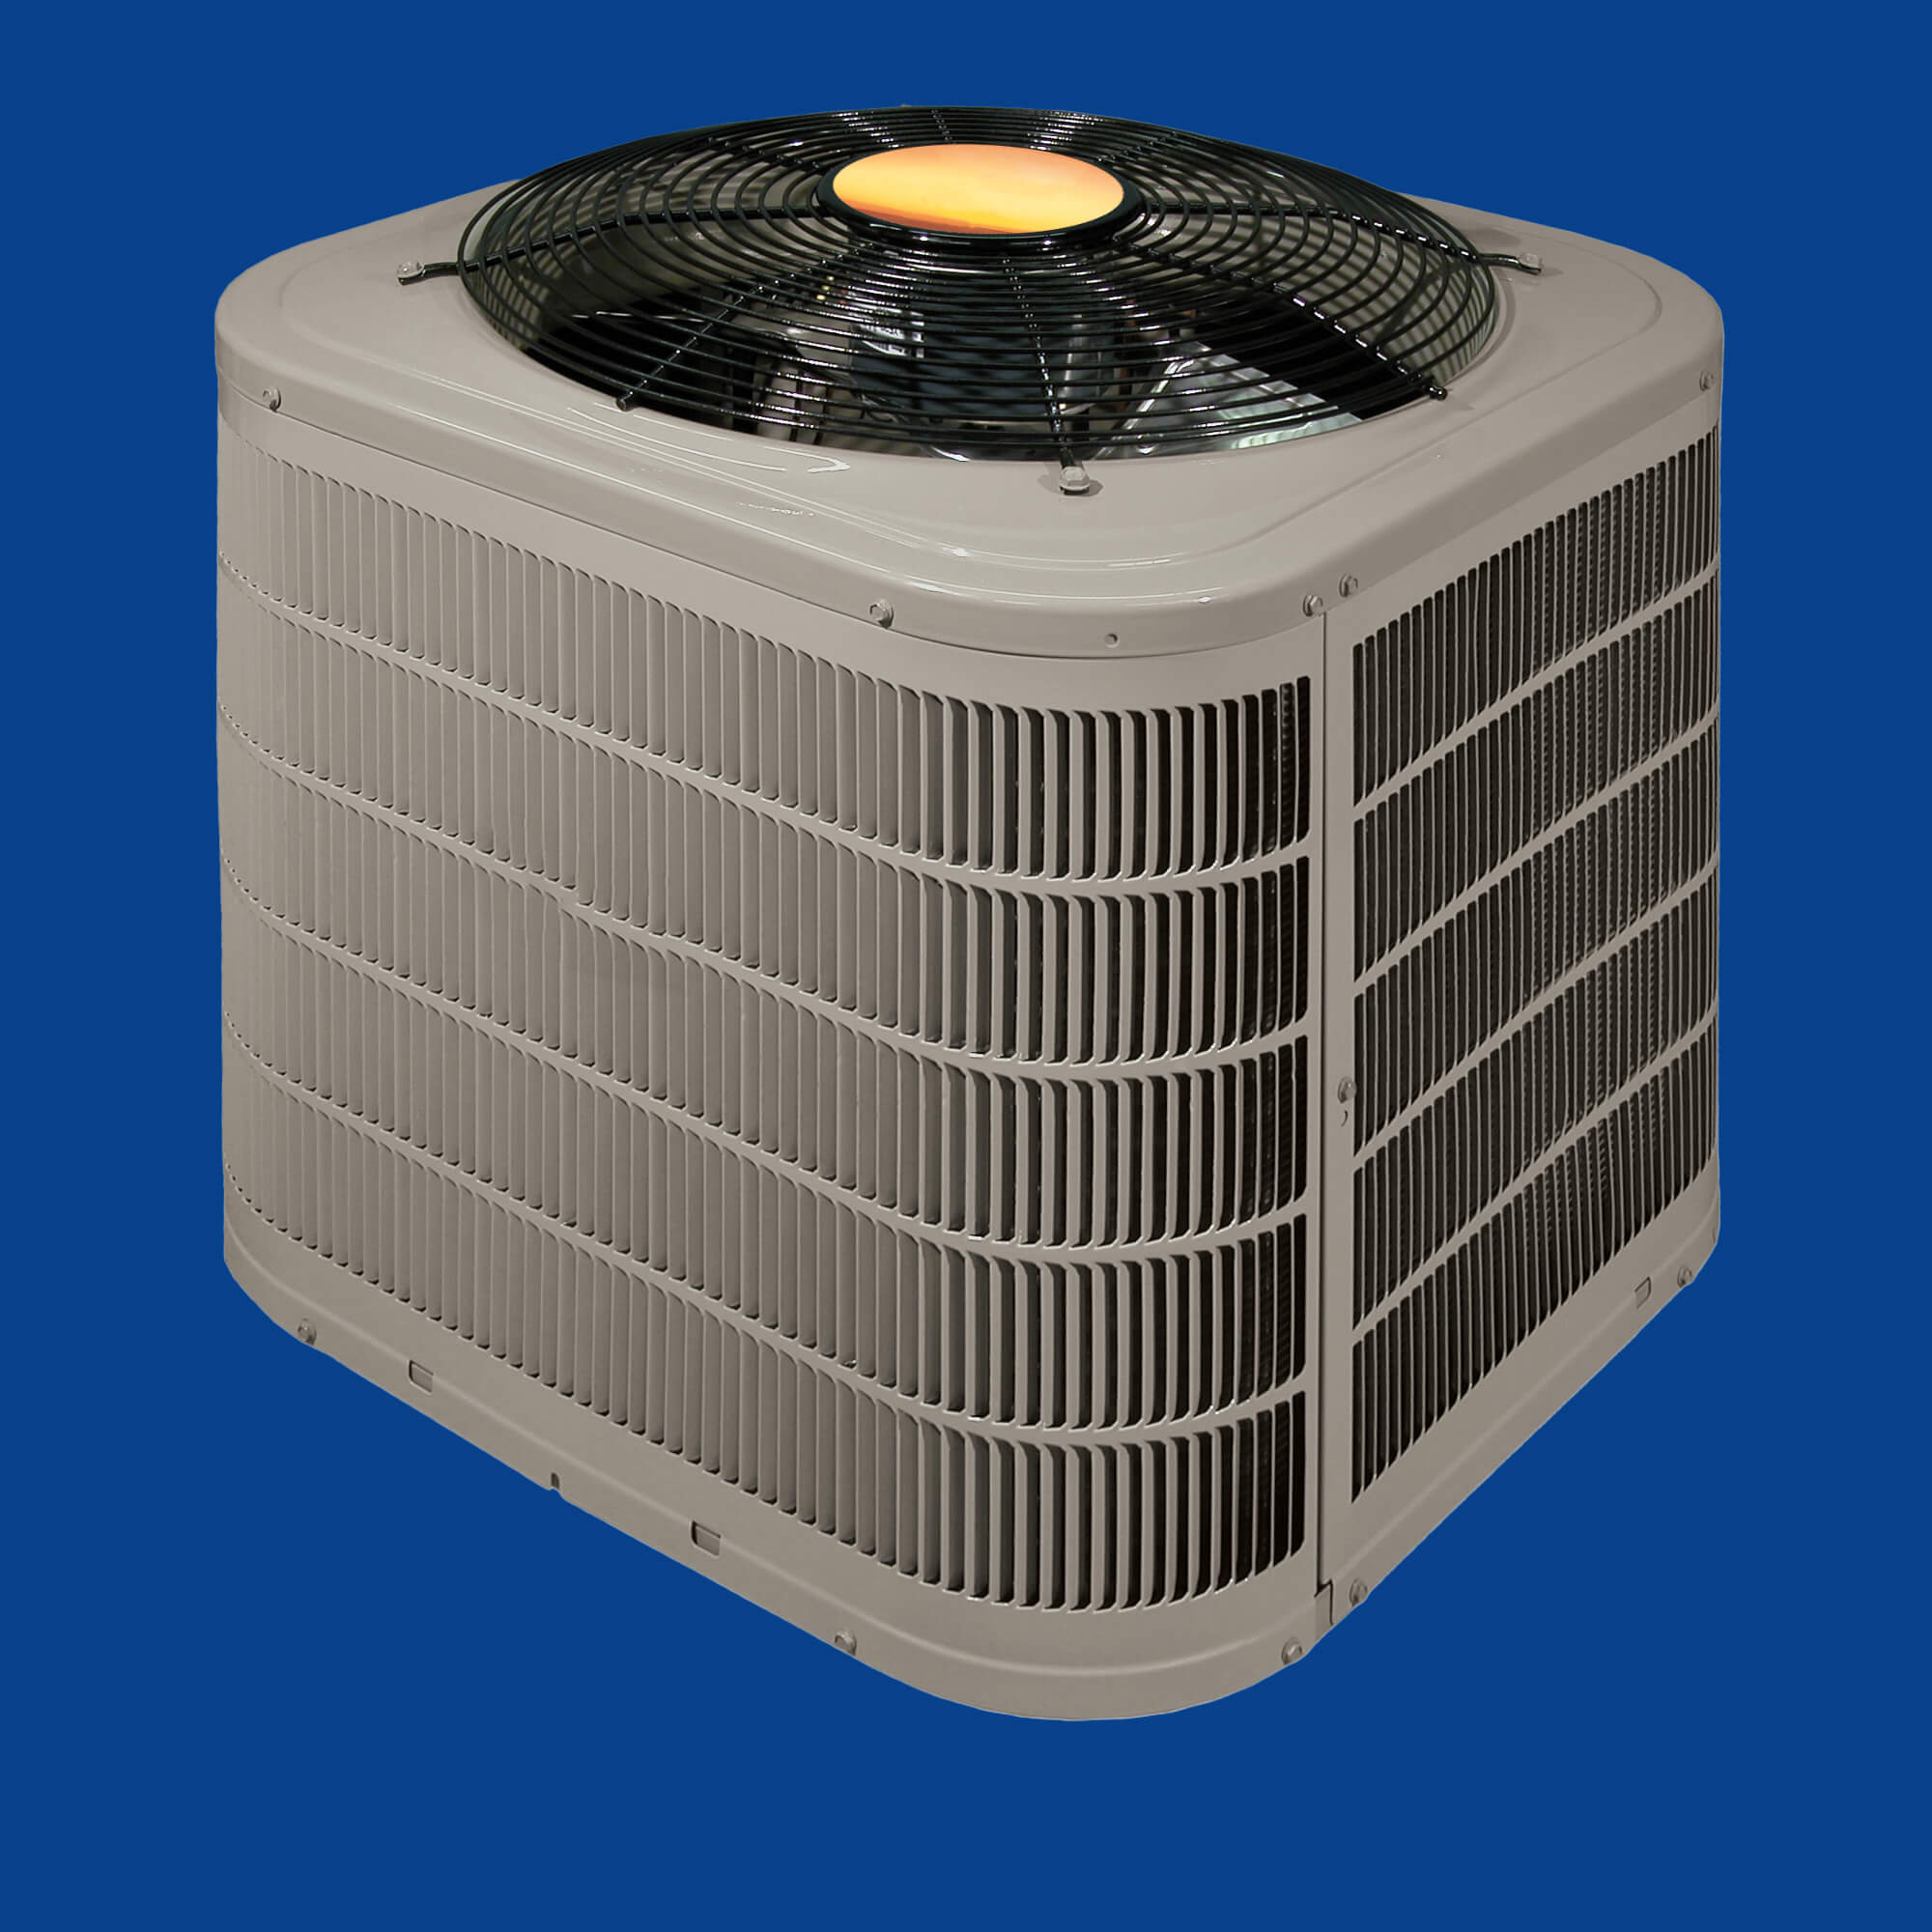 Air conditioning company Crystal River